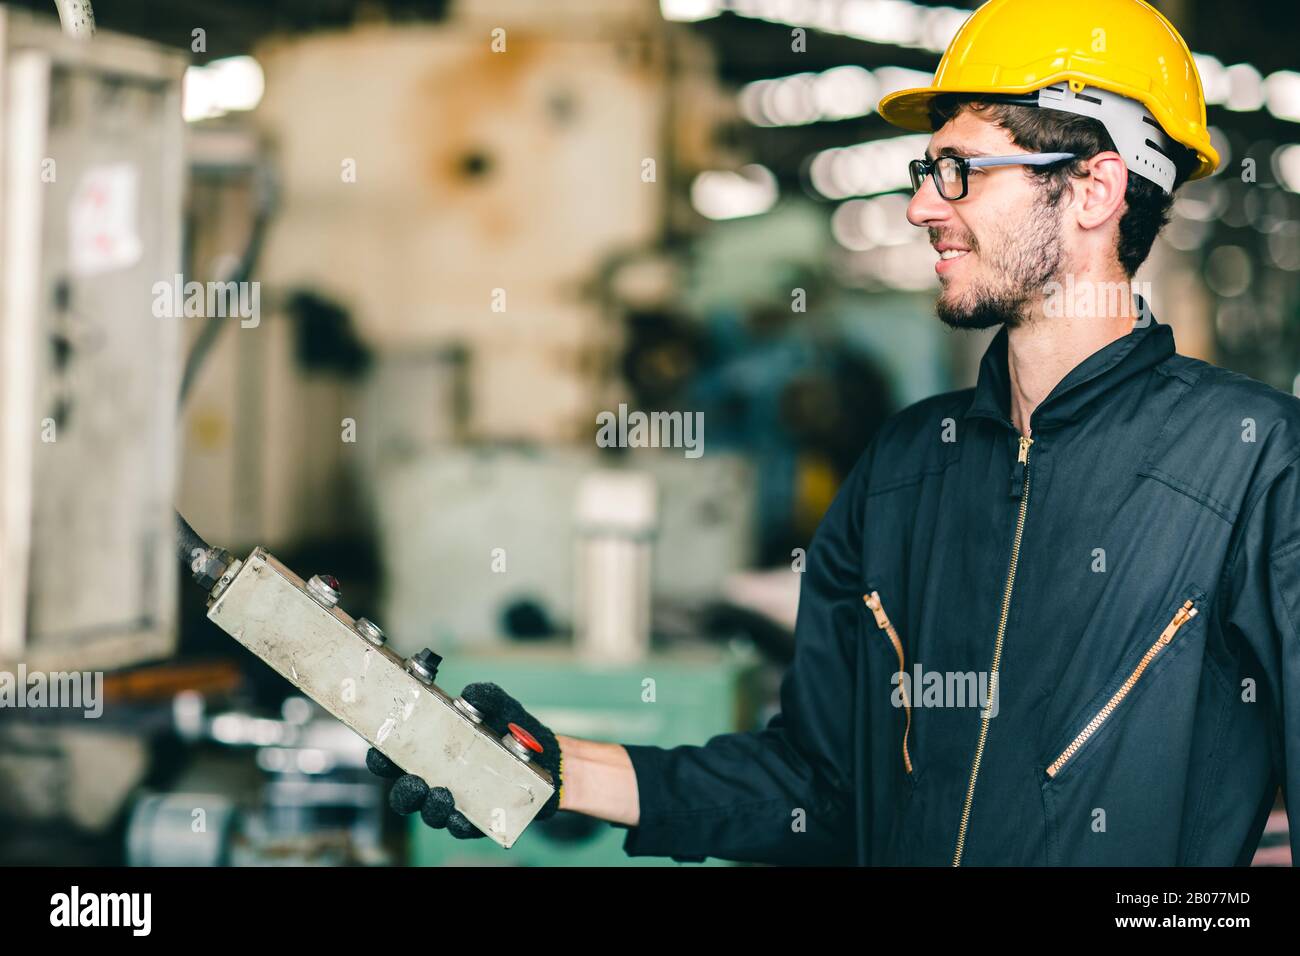 Labor worker engineer with safety suit and helmet happy smiling enjoy working operate heavy machine in industry factory. Stock Photo